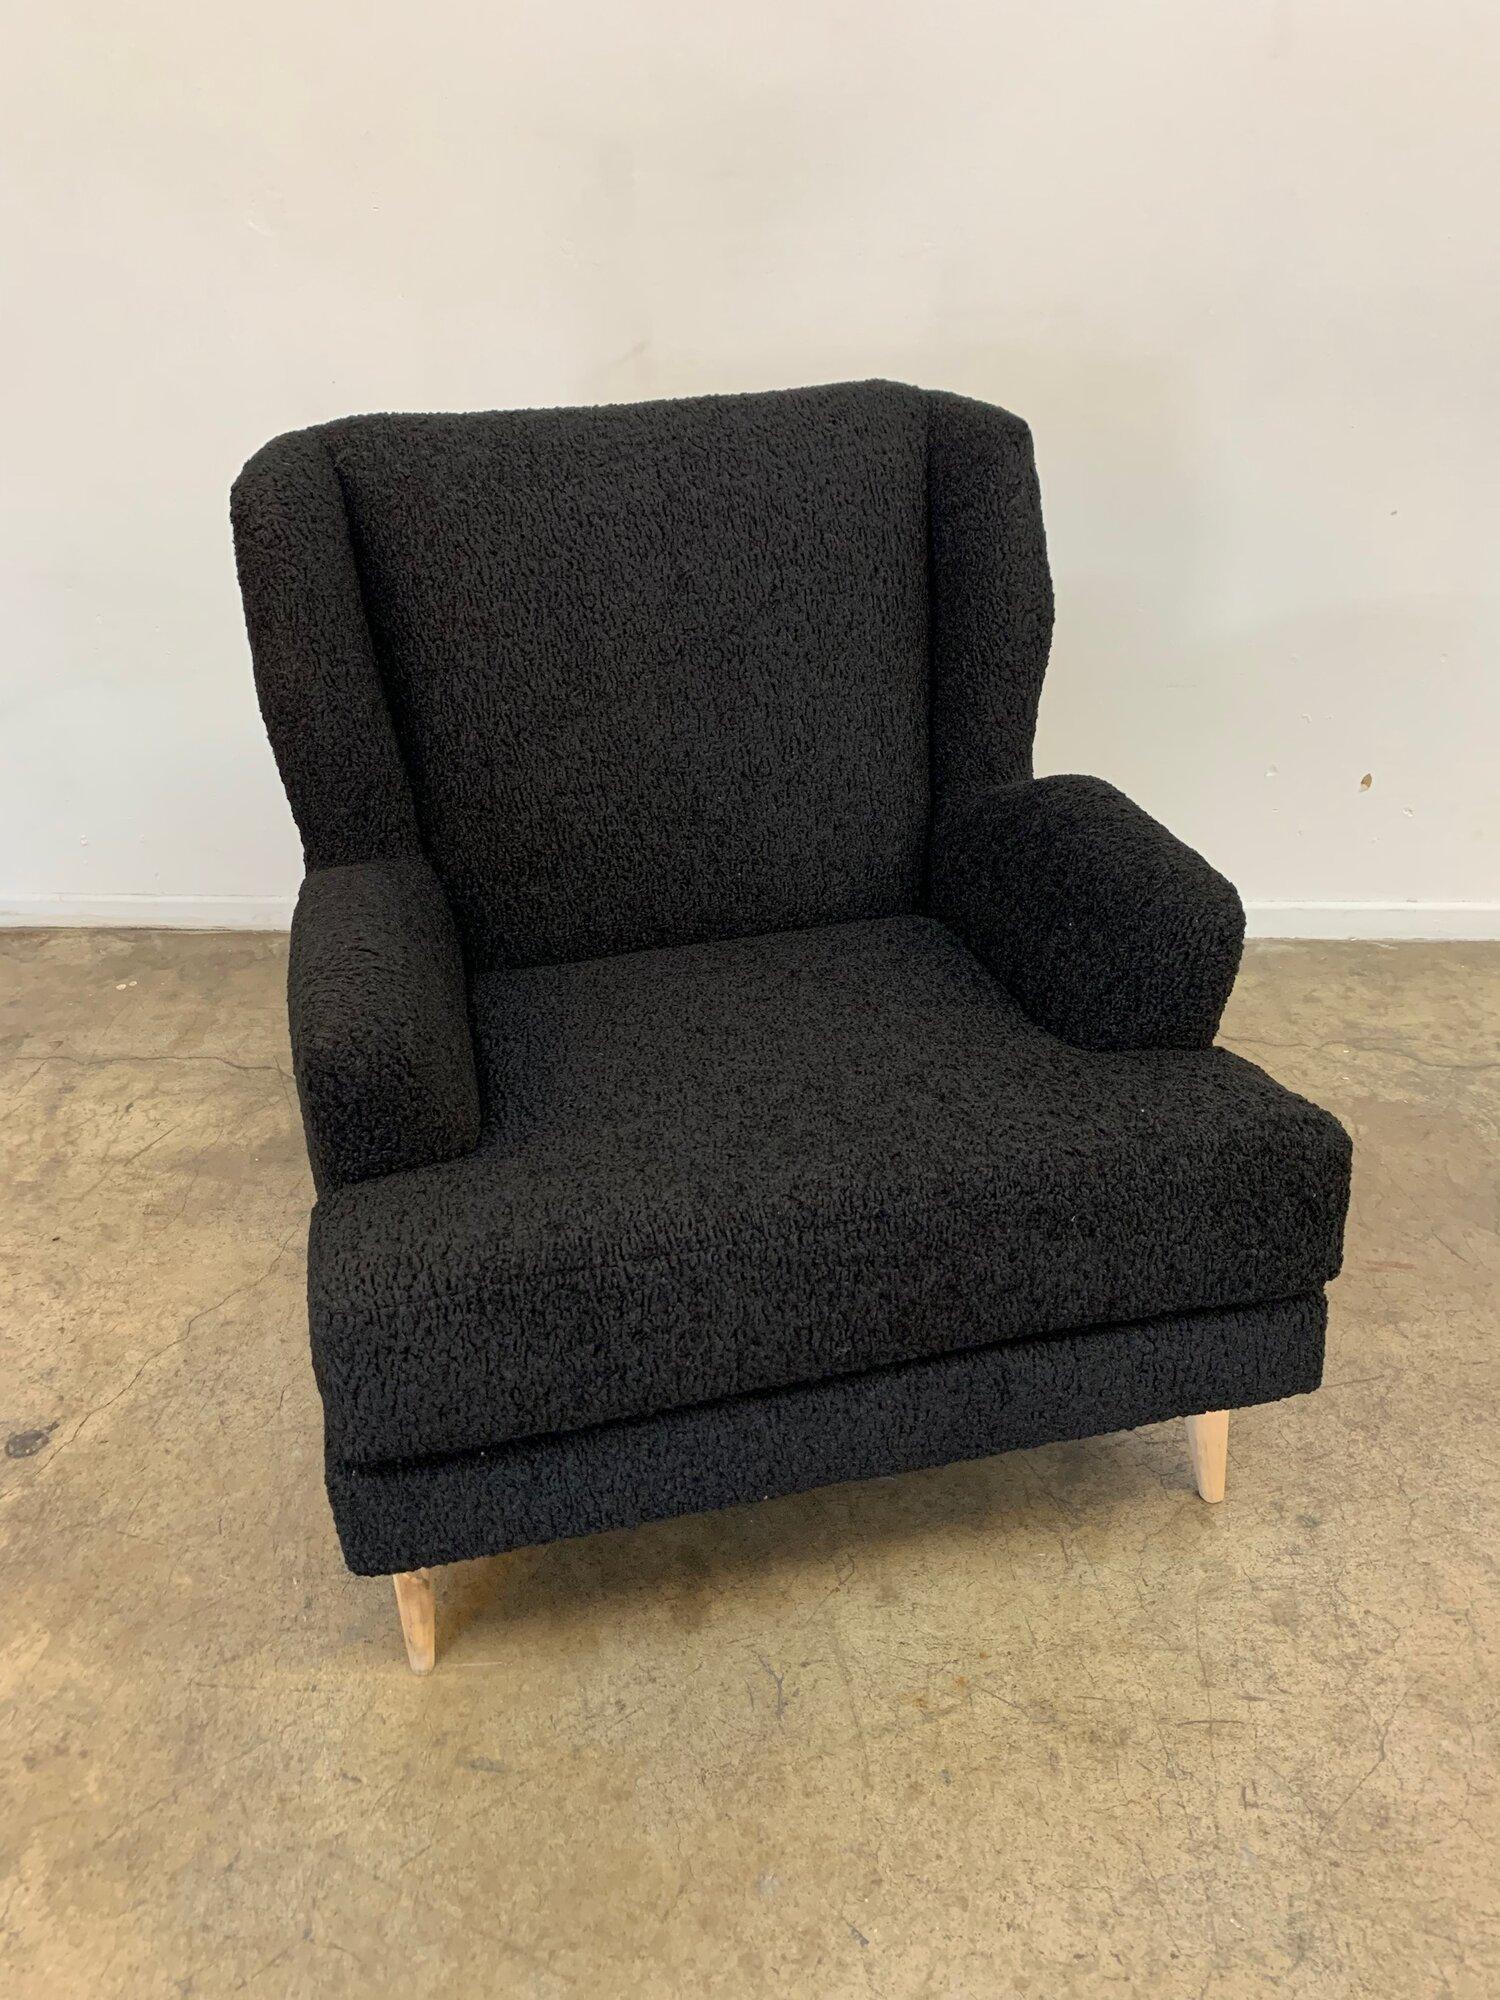 Custom Made Lounge Chair in Black Sherpa In Good Condition For Sale In Los Angeles, CA